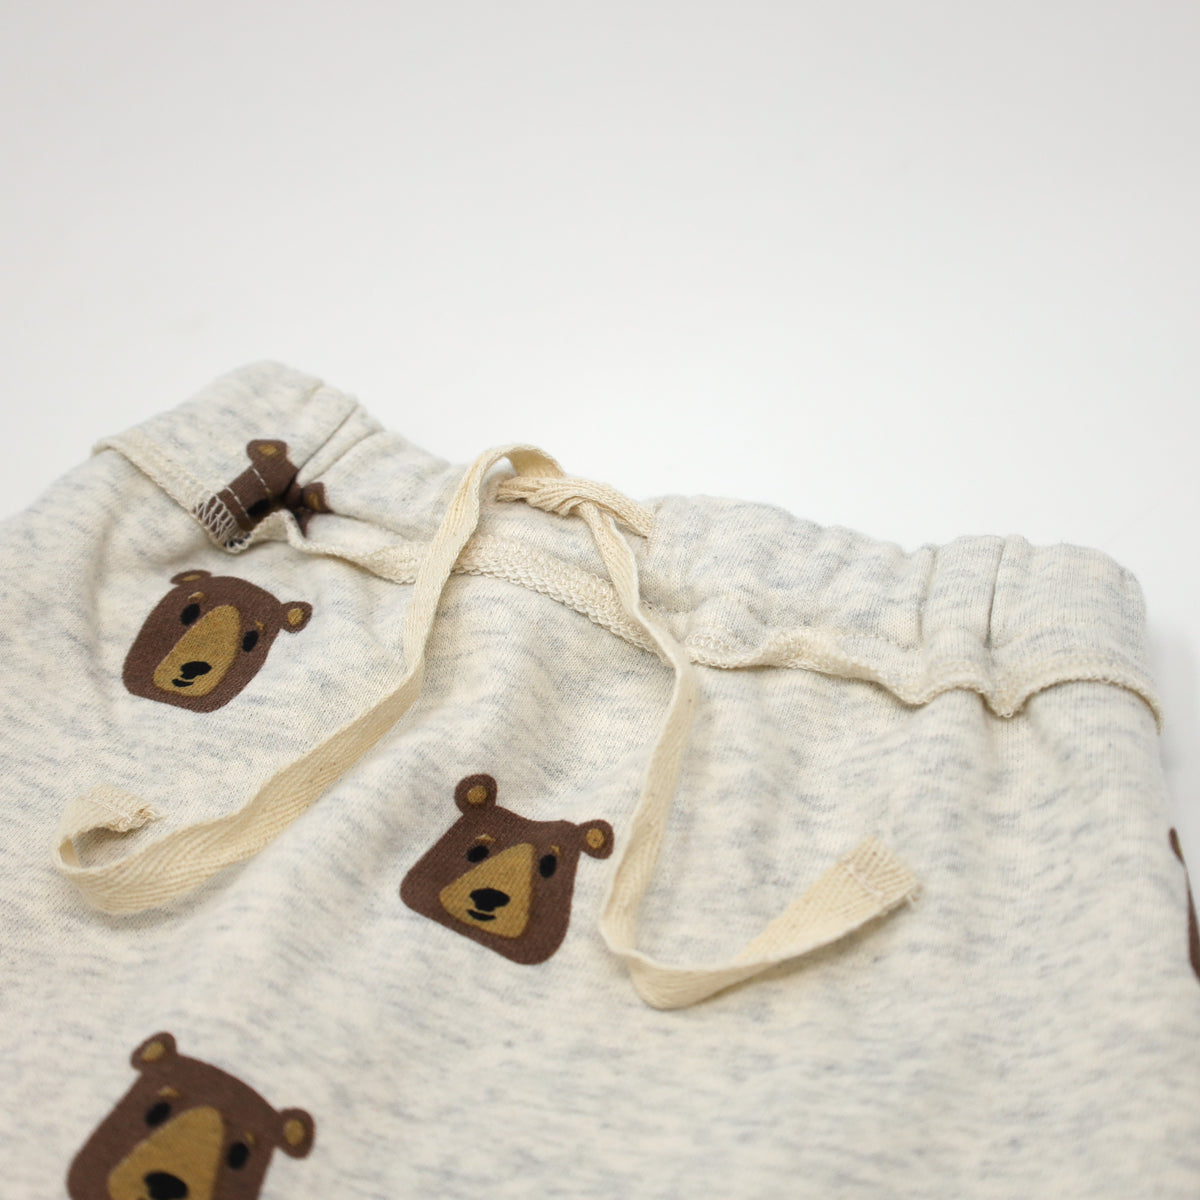 oh baby! Brooklyn Jogger with Brown Bear Faces Print - Oatmeal Heather